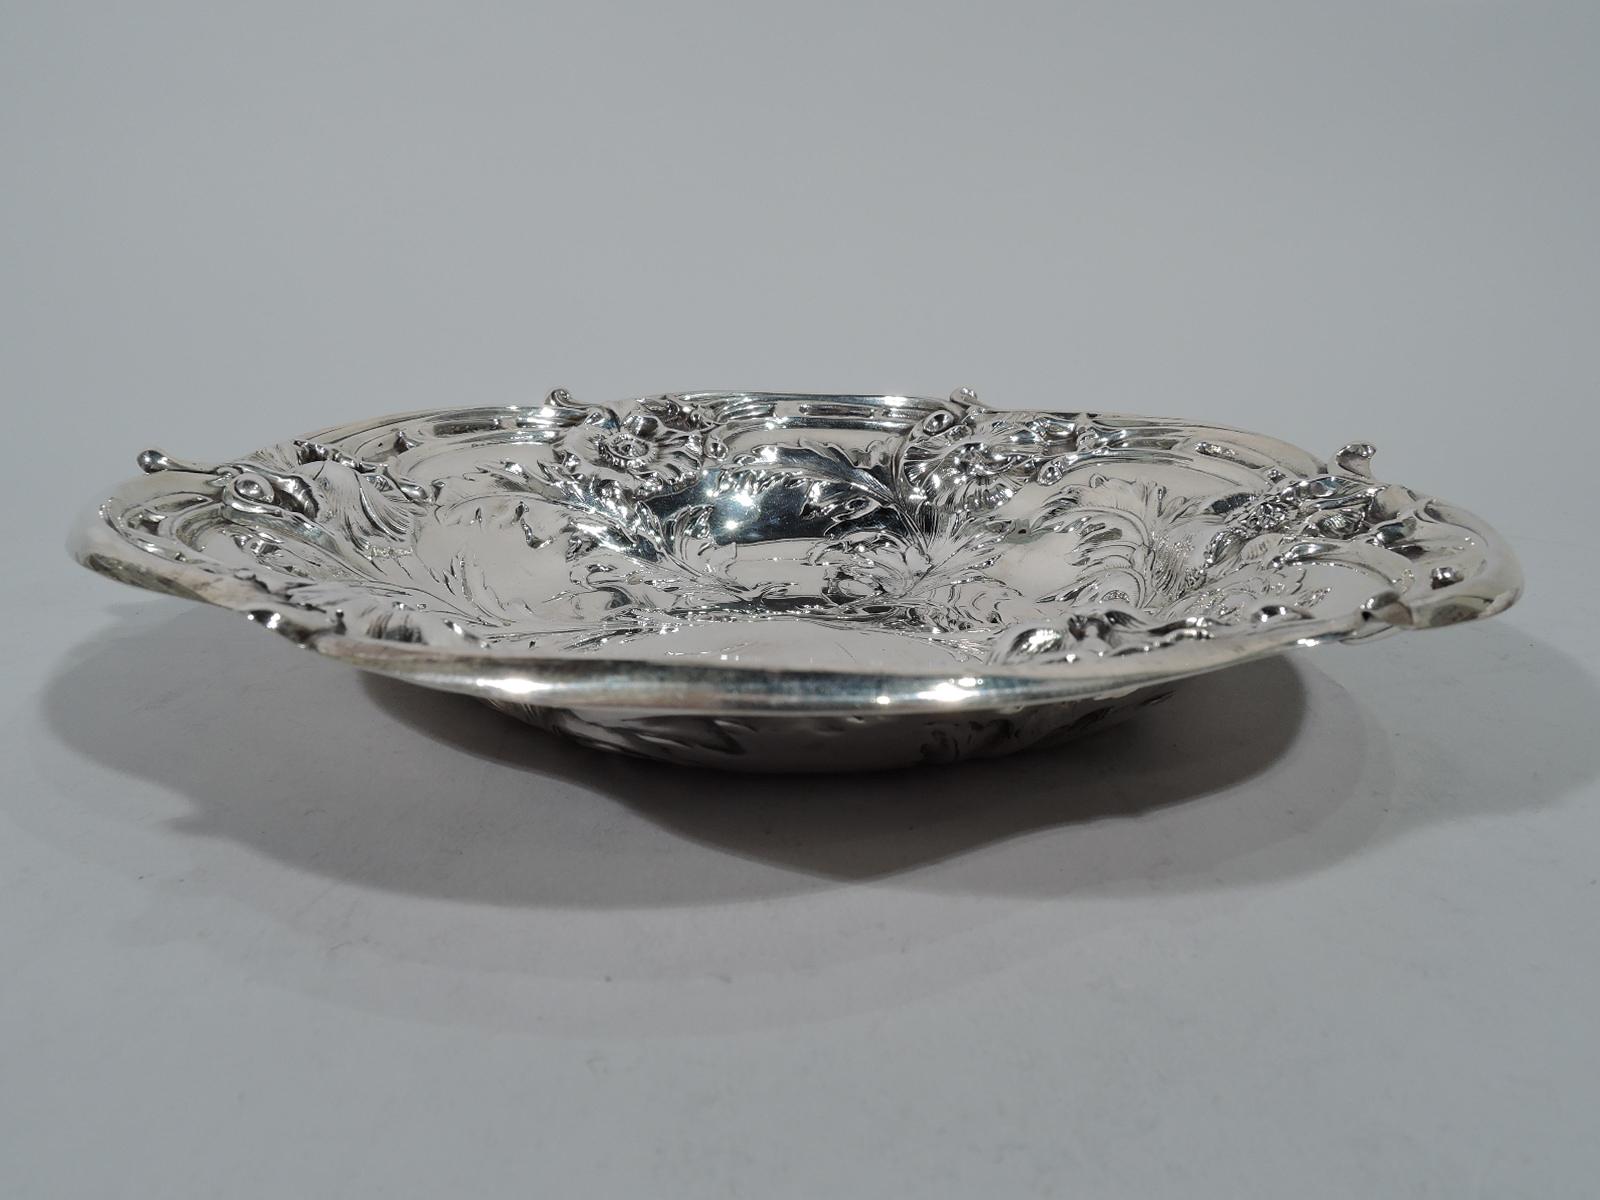 Art Nouveau sterling silver bowl. Made by Reed & Barton in Taunton, Mass in 1956. Lobed well and scrolled rim. Chased ornament in form of flowers with stems terminating in well to make room for a frame (vacant). Tactile and dynamic. Hallmark